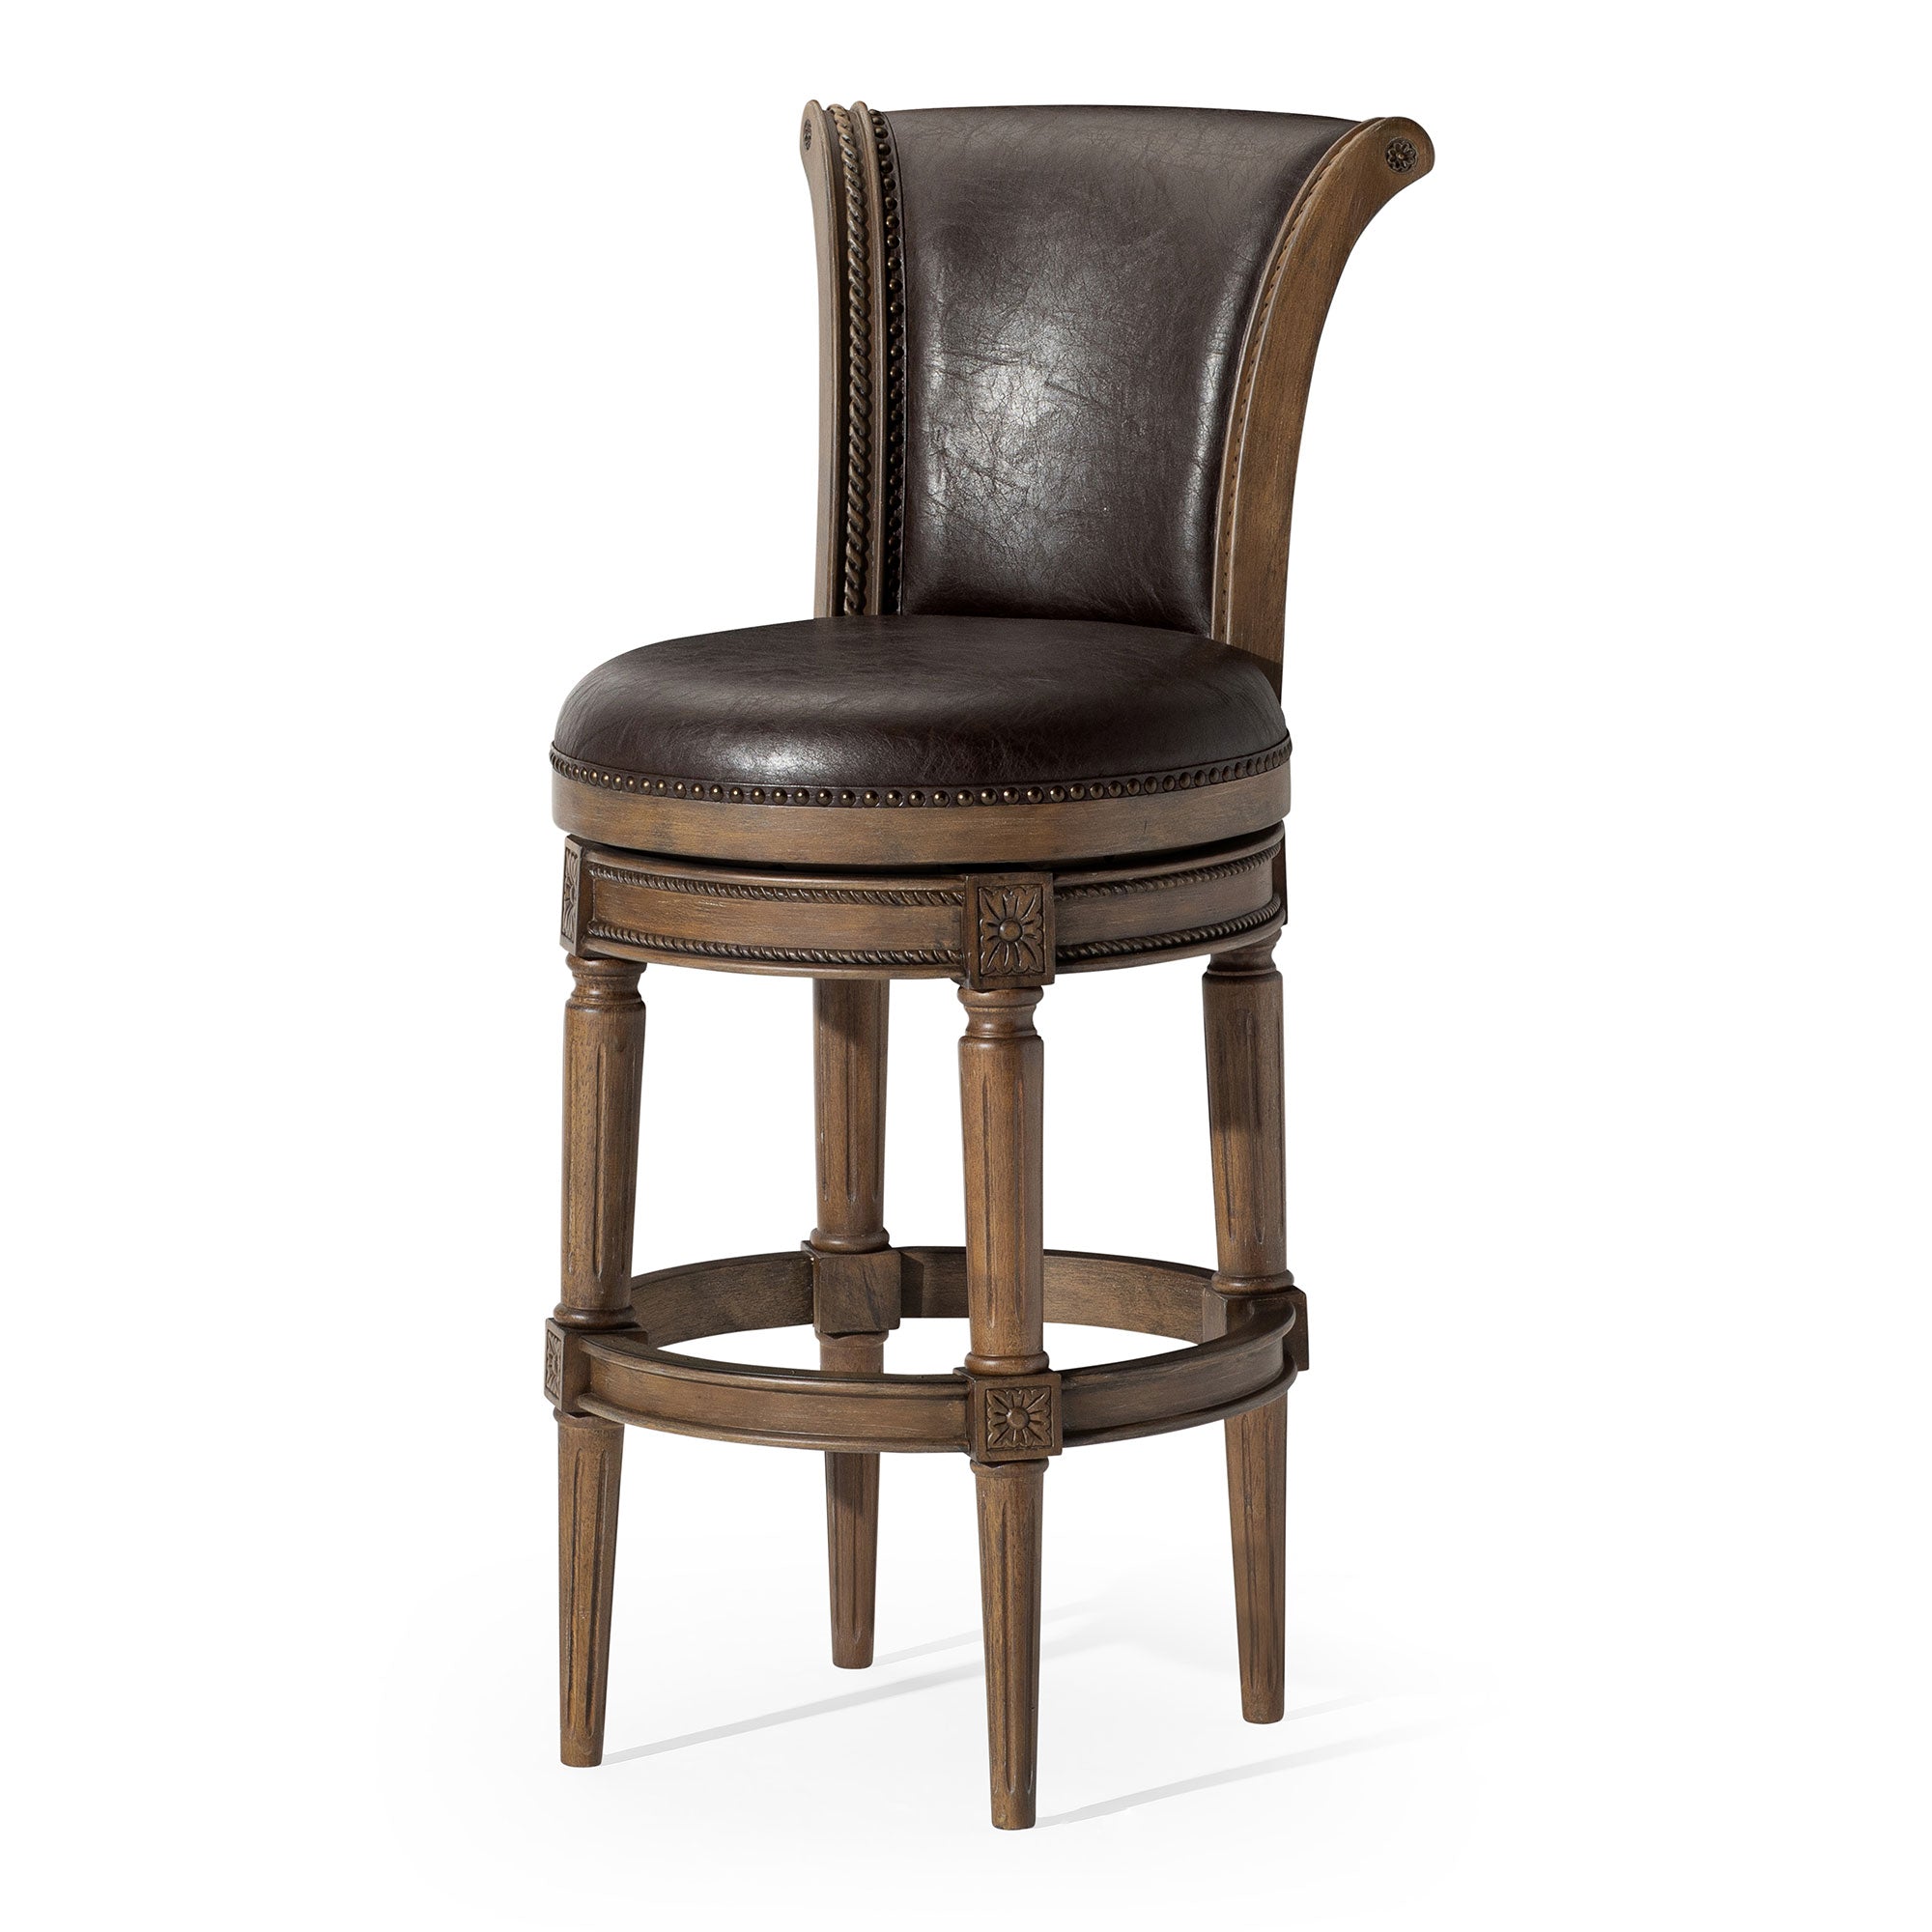 Pullman Bar Stool in Walnut Finish with Marksman Saddle Vegan Leather in Stools by Maven Lane